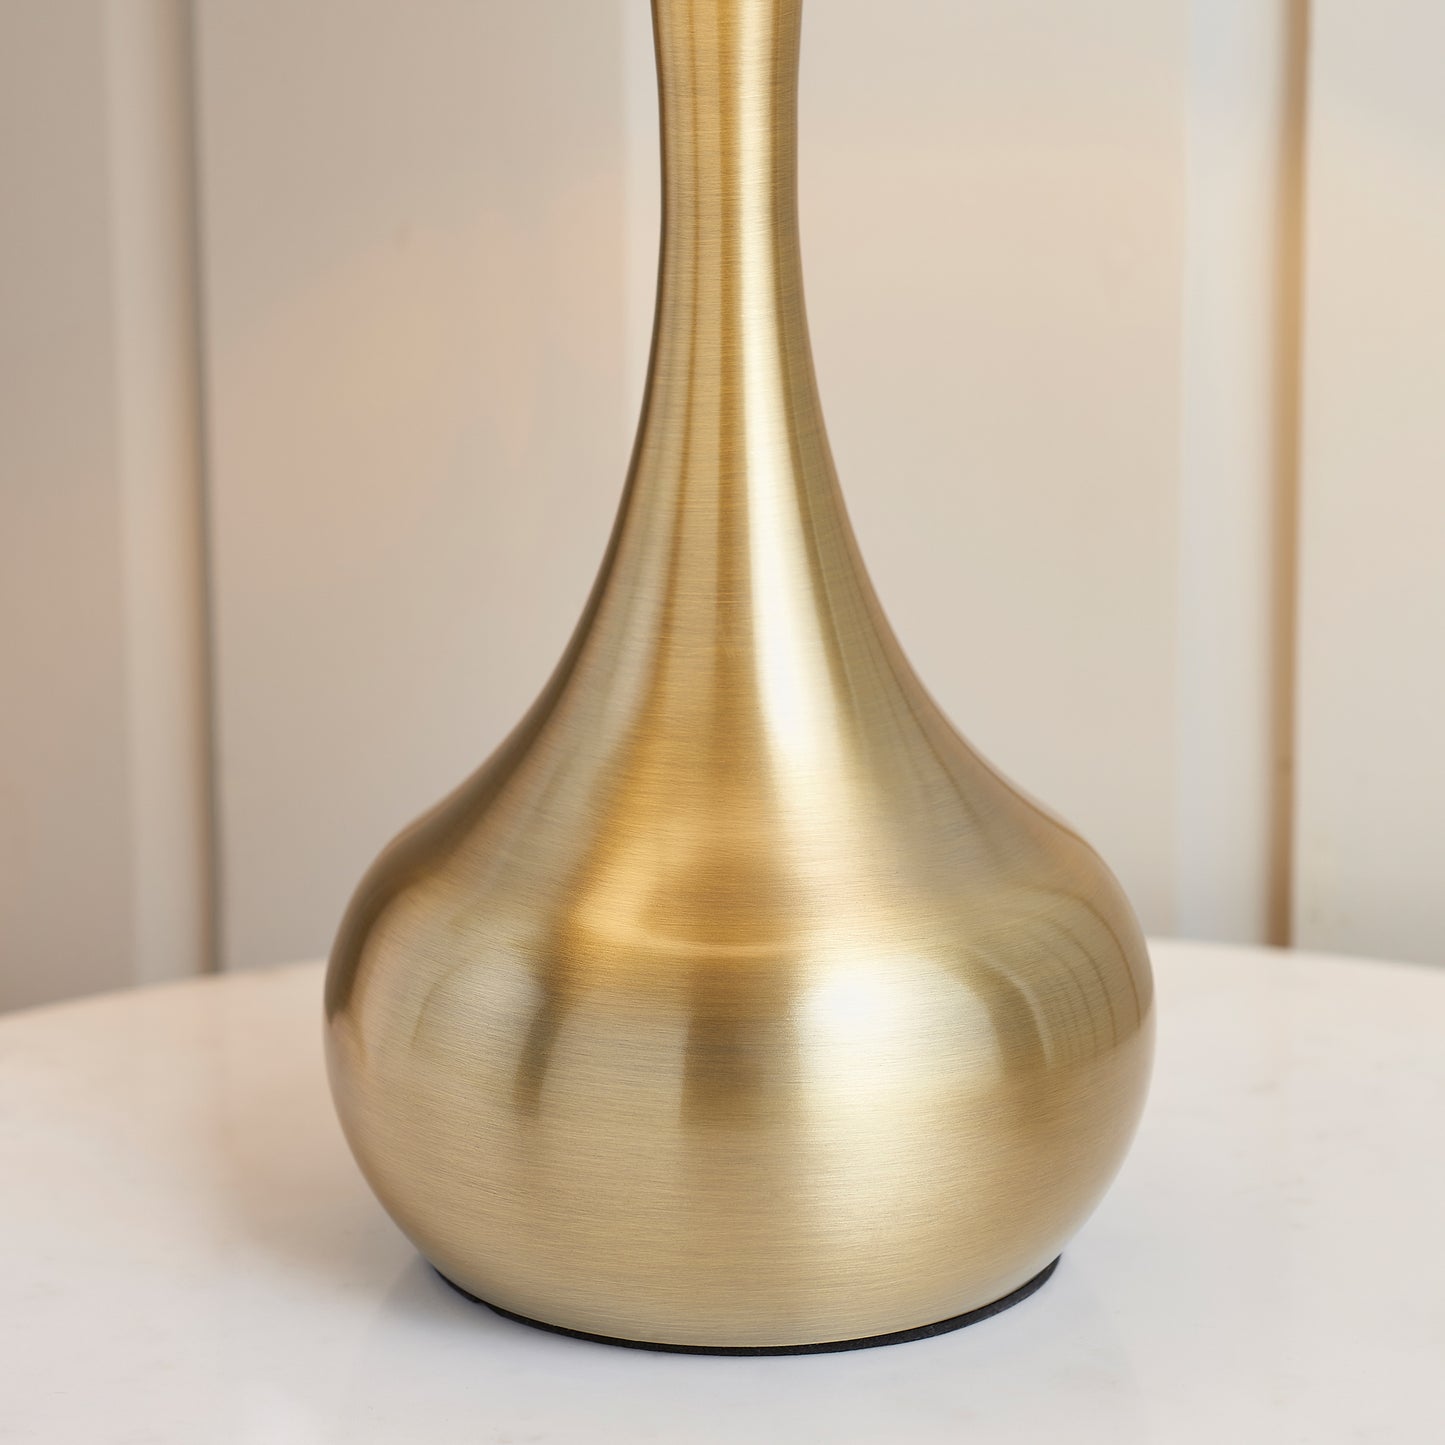 A Piccadilly Table Lamp Brass & Taupe by Kikiathome.co.uk adding elegance to home furniture and interior decor on a white table.